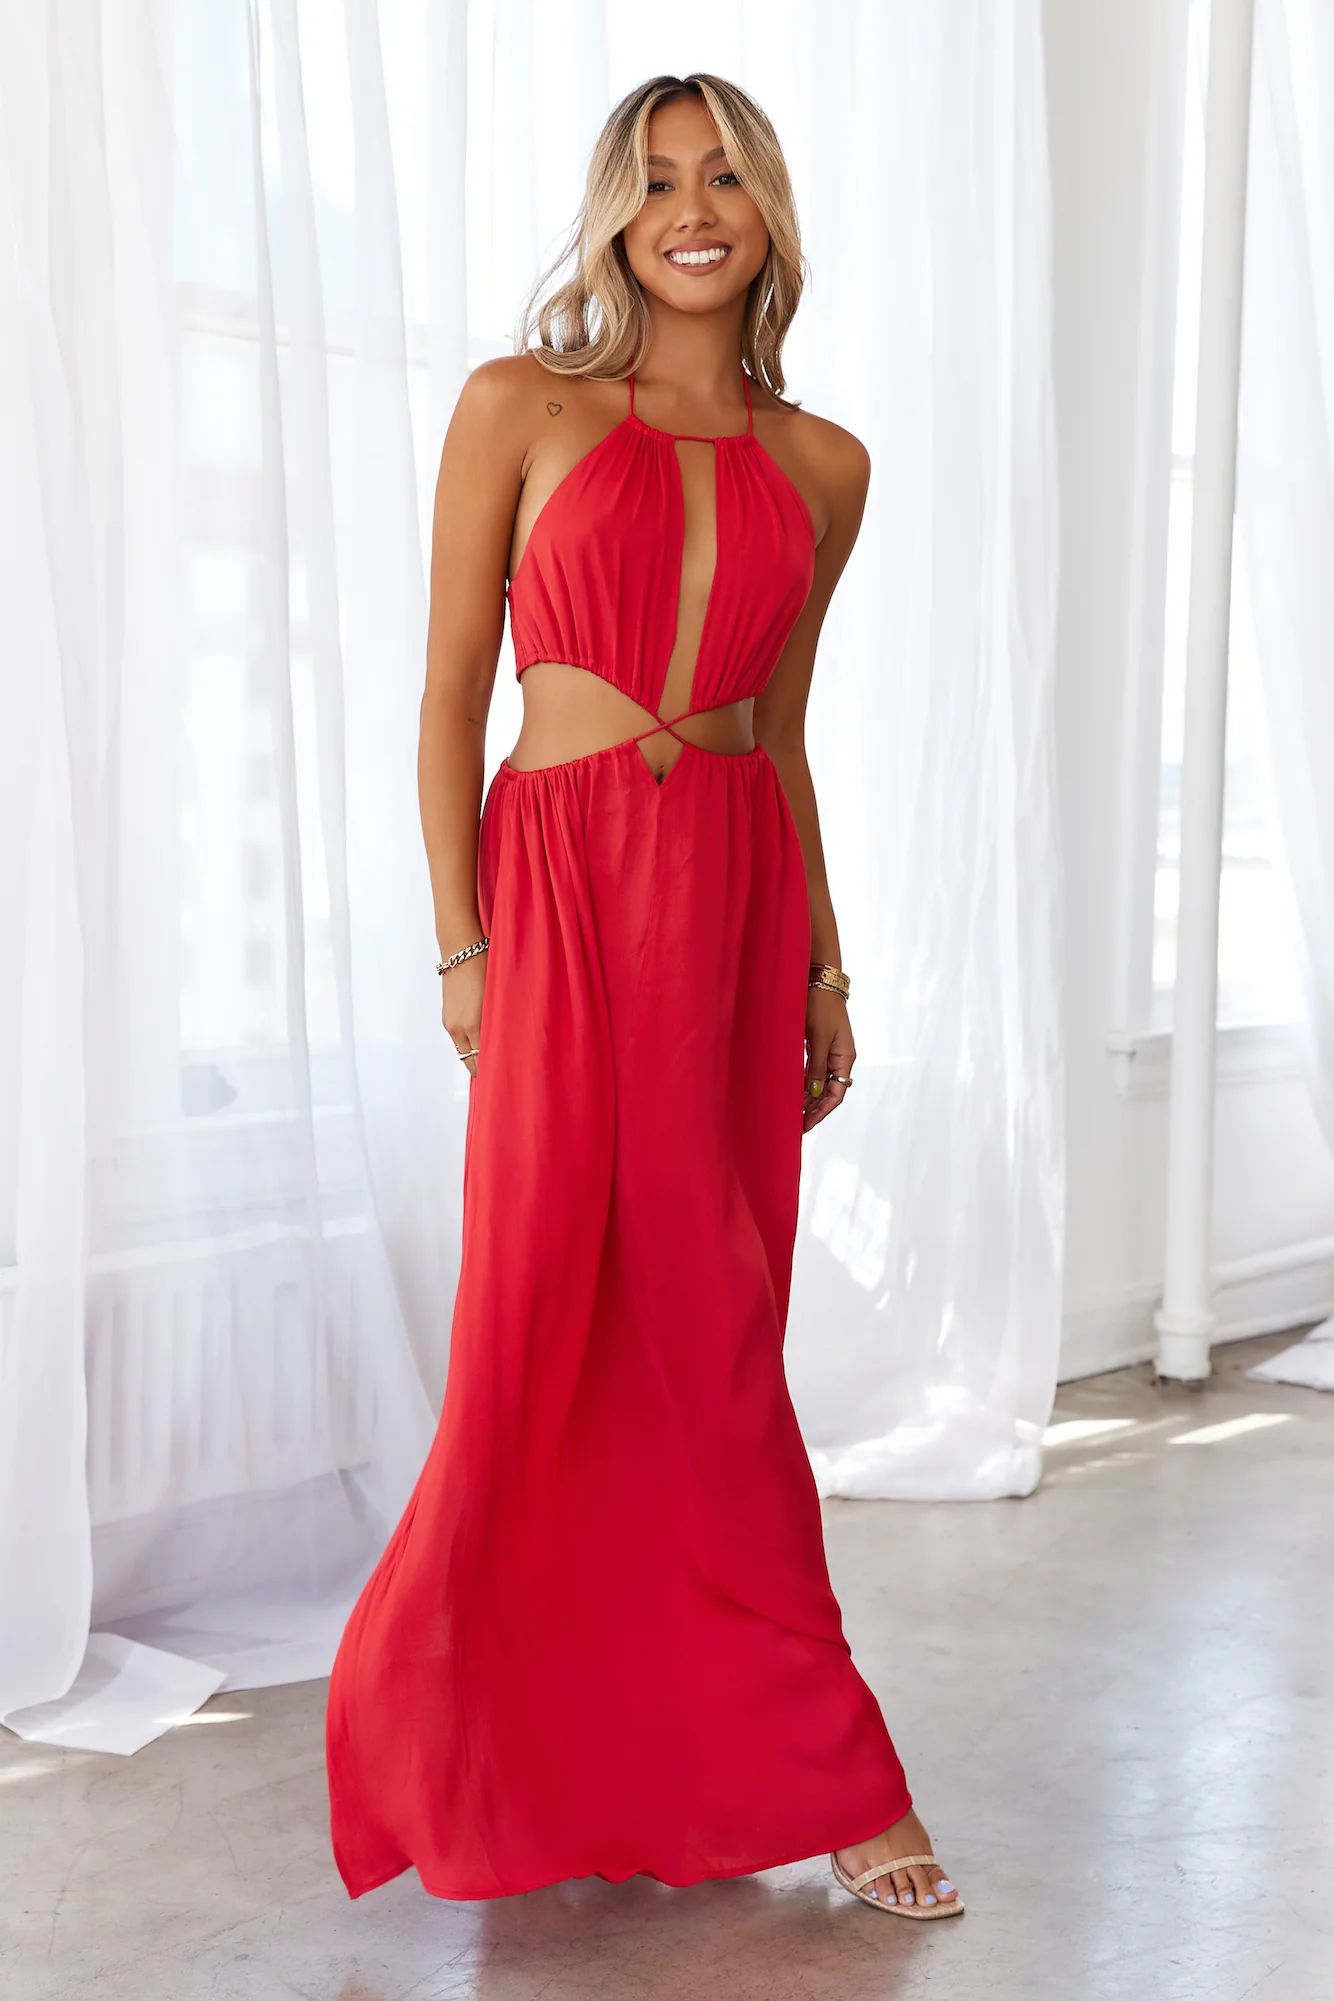 HELLO MOLLY Keep It Flowing Maxi Dress Red | Hello Molly